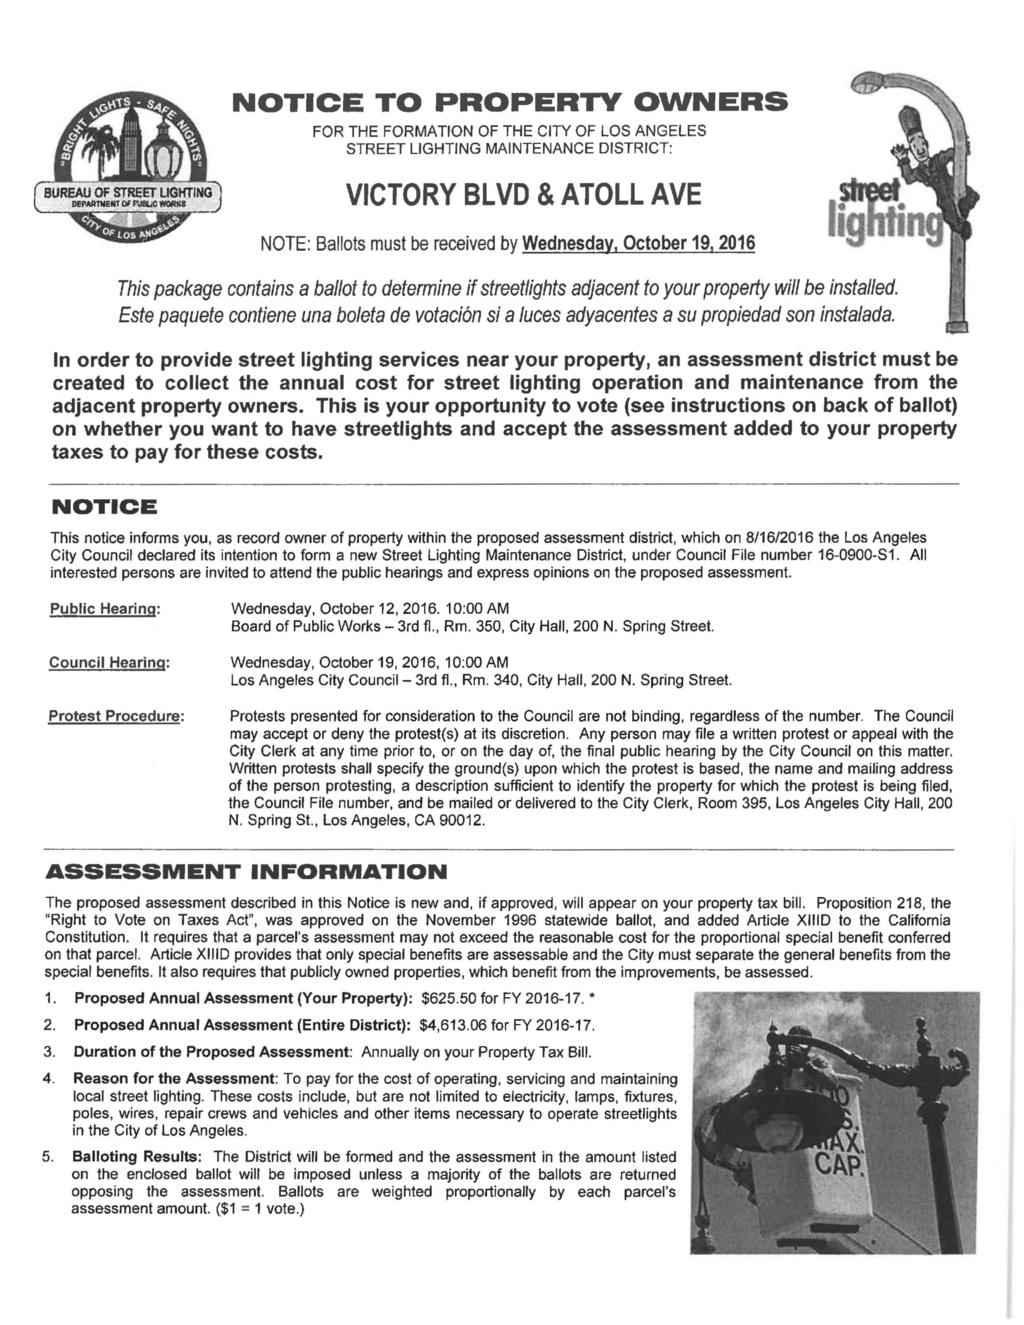 '!: BUREAU OF STREET LIGHTING''] DEPARTMENT Of PUSUC W0RX8 NOTICE TO PROPERTY OWNERS FOR THE FORMATION OF THE CITY OF LOS ANGELES STREET LIGHTING MAINTENANCE DISTRICT: VICTORY BLVD & ATOLL AVE NOTE: